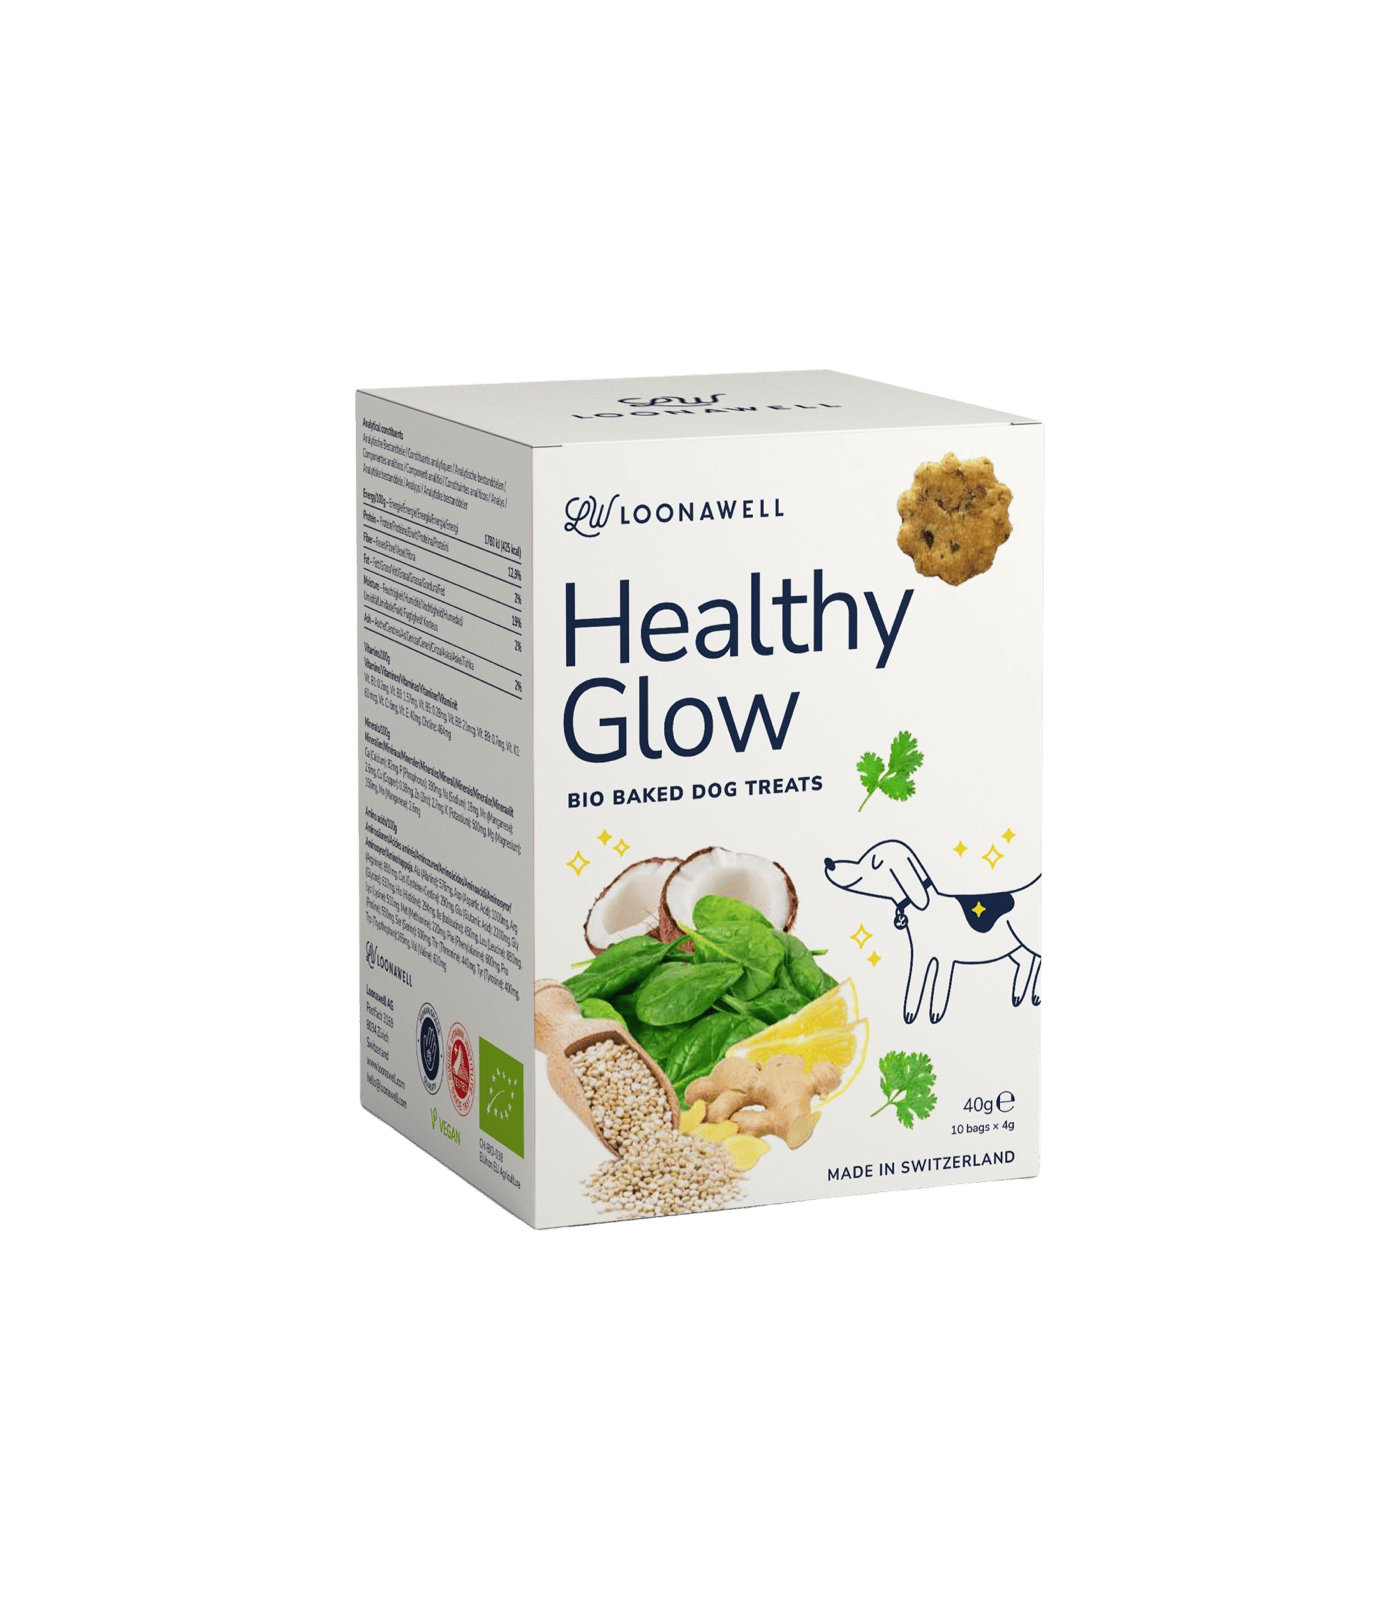  LOONAWELL Healthy Glow organic treats for dogs with sensitive skin. All natural treats made in Switzerland. Organic treats by LOONAWELL.